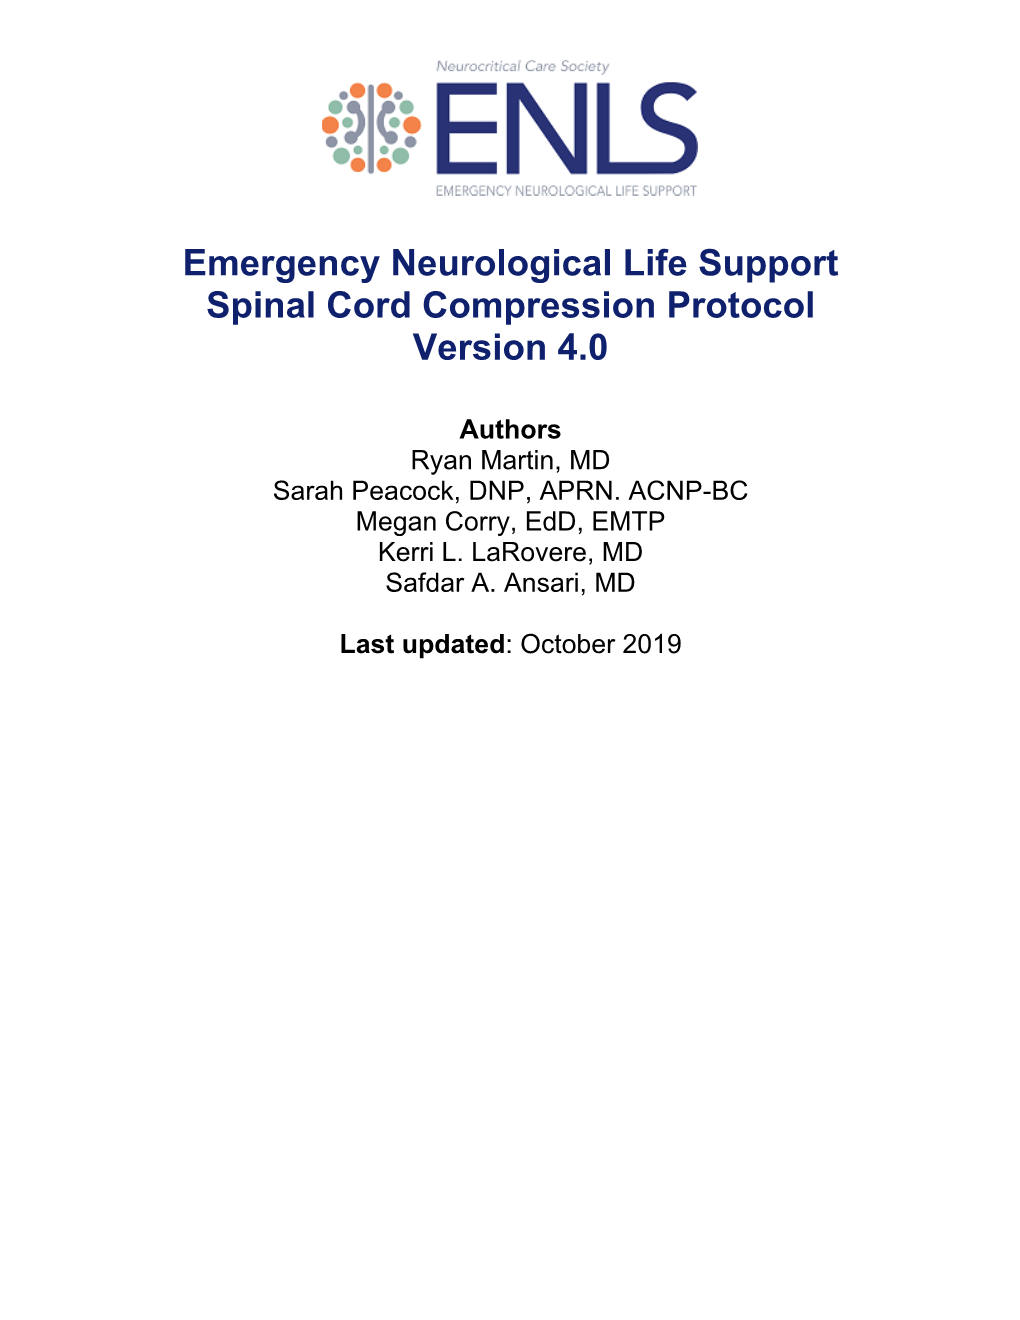 Emergency Neurological Life Support Spinal Cord Compression Protocol Version 4.0